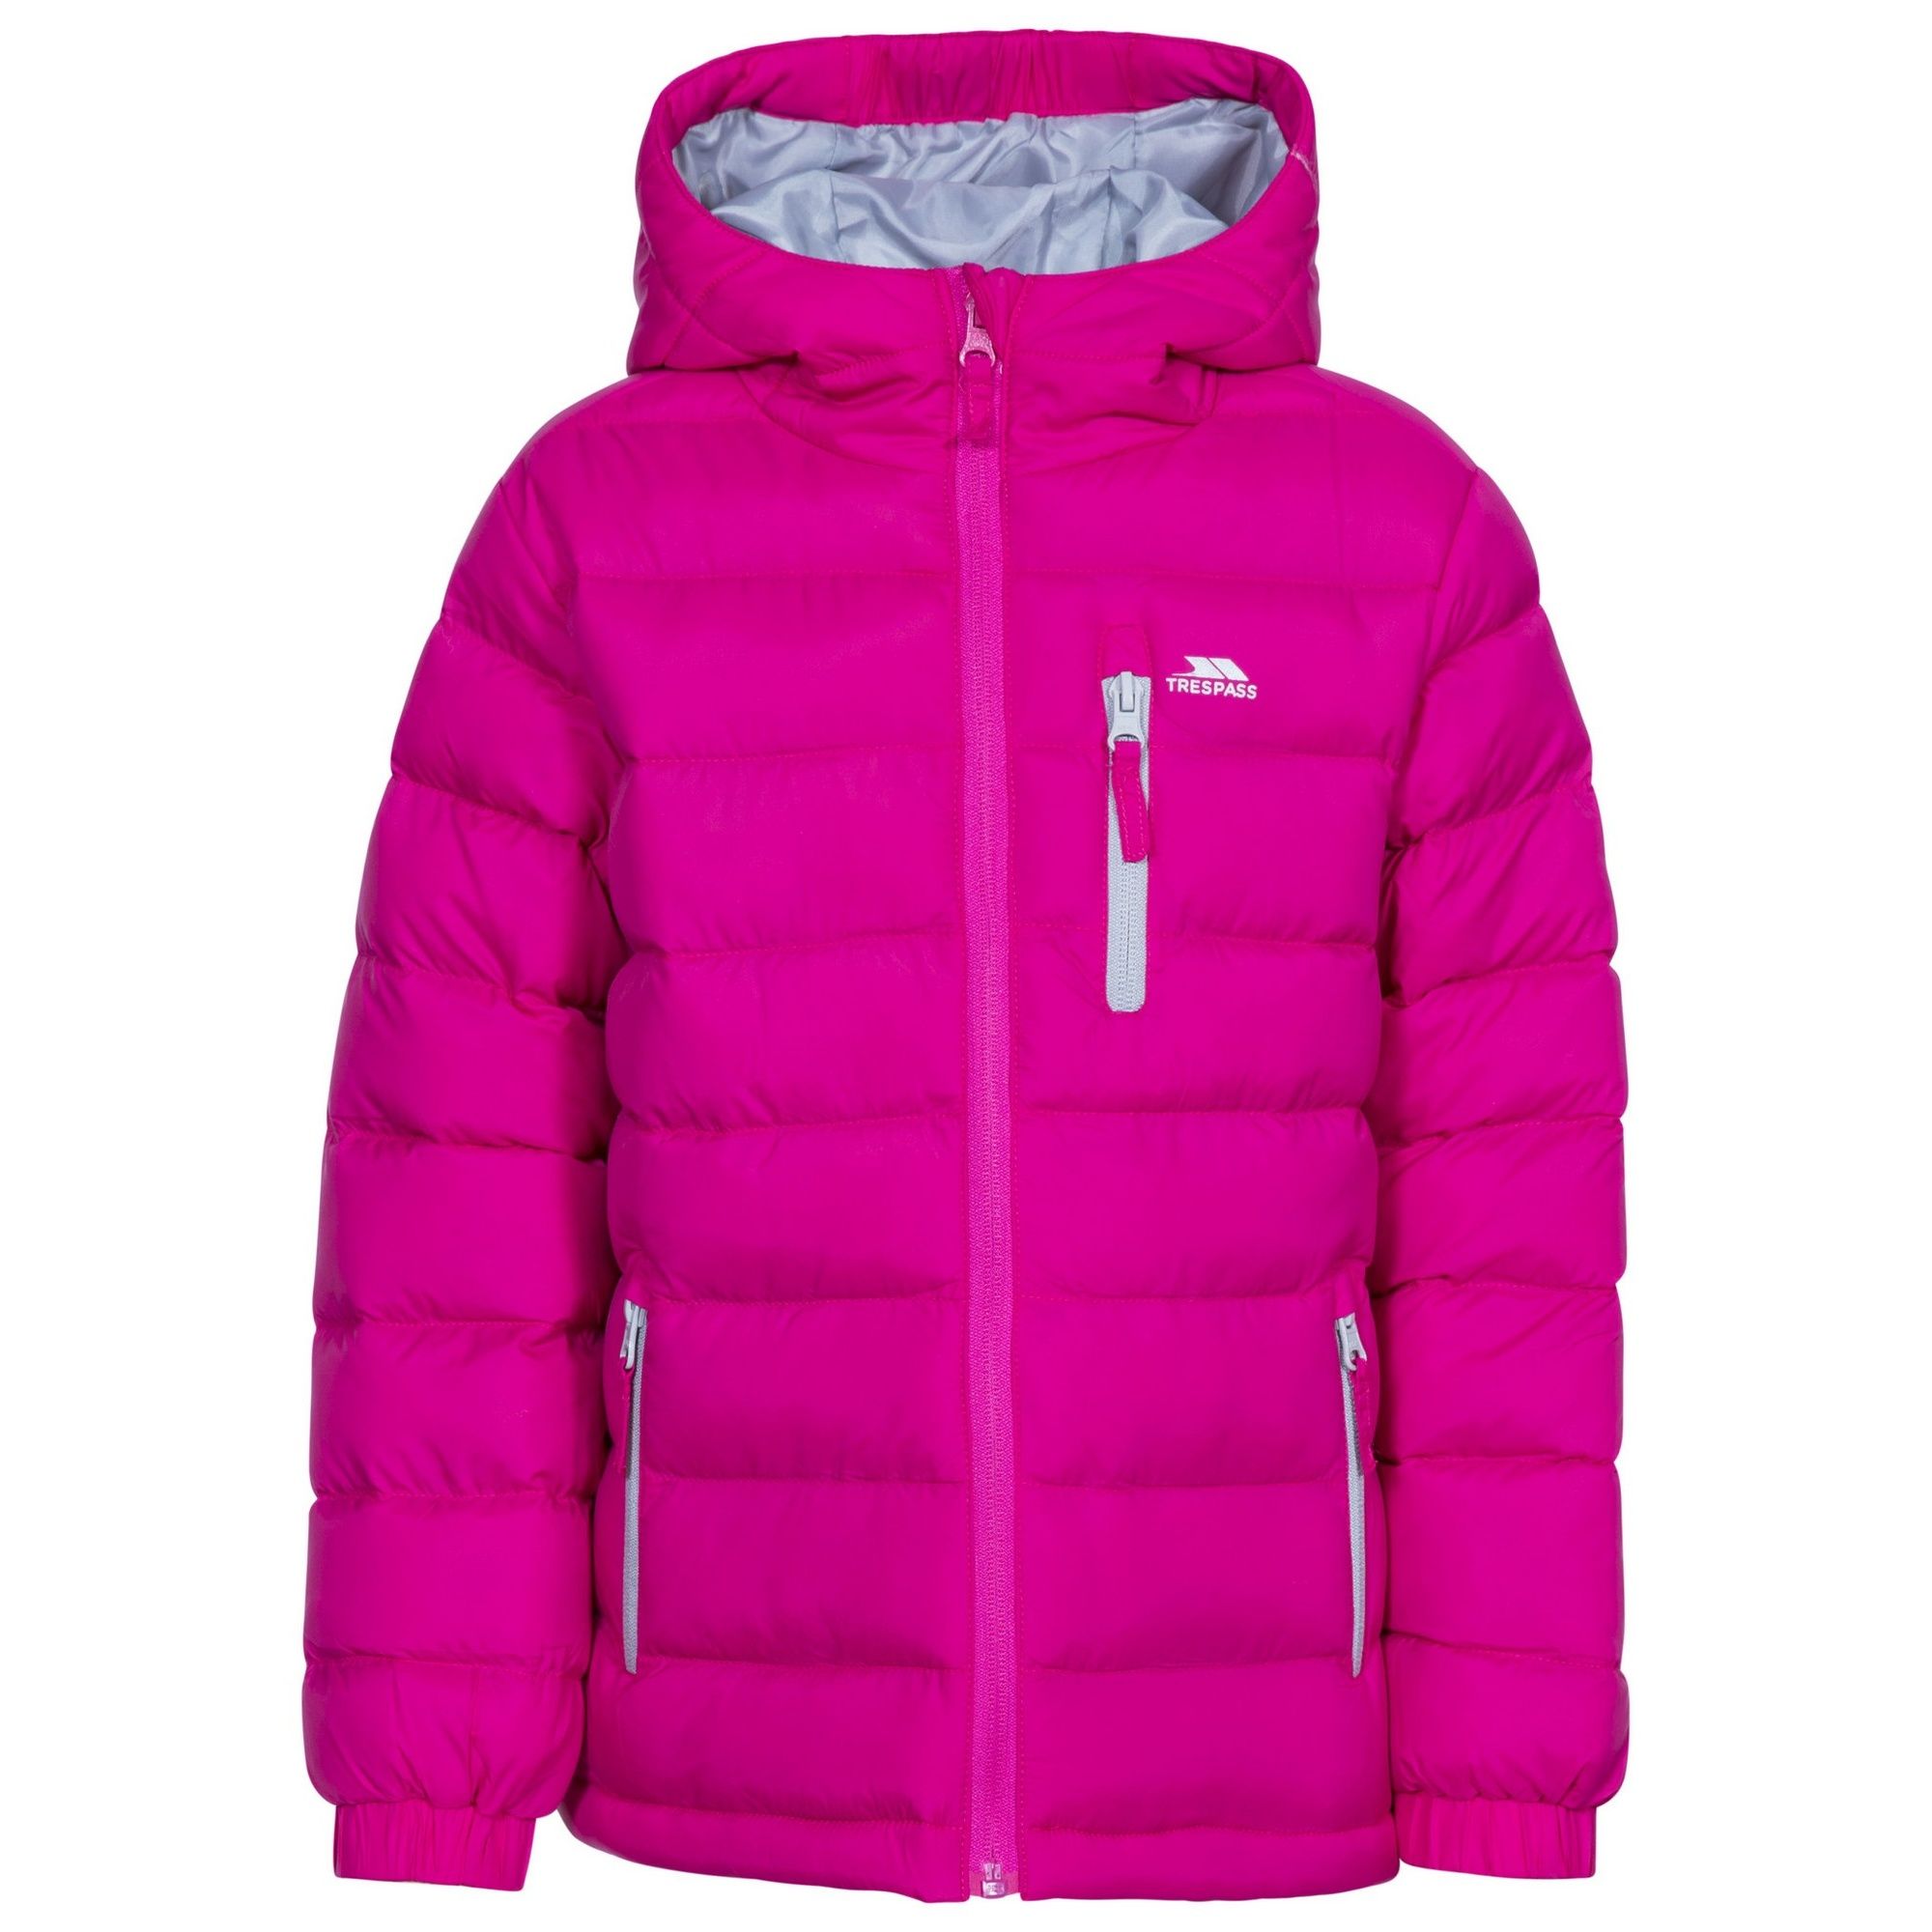 Padded/quilted jacket. Grown on hood. 3 contrast zip pockets. Full cuff elastication. Contrast lining. Water-resistant, wind-resistant. Shell: 100% Polyamide, Lining: 100% Polyester, Filling: 100% Polyester. Trespass Childrens Chest Sizing (approx): 2/3 Years - 21in/53cm, 3/4 Years - 22in/56cm, 5/6 Years - 24in/61cm, 7/8 Years - 26in/66cm, 9/10 Years - 28in/71cm, 11/12 Years - 31in/79cm.